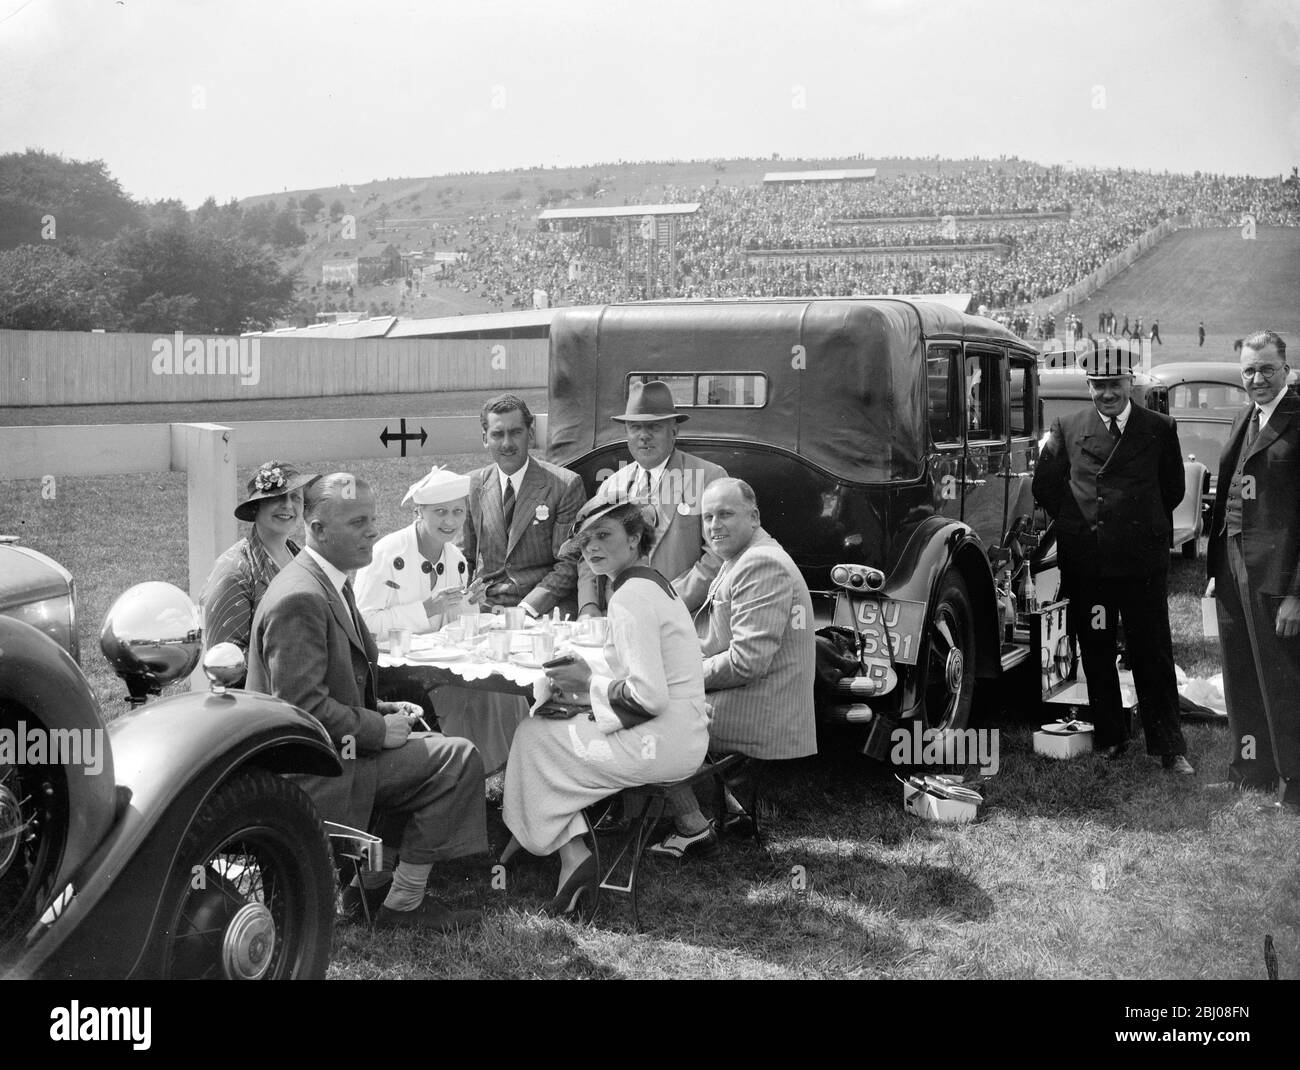 Sir Reginald Tuck ' s Goodwood luncheon party . - Major Sir Reginald Tuck ' s luncheon pary on the course at Goodwood on the first day . Mr Reginald is seated on the car ( centre ) . - 30 July 1935 Stock Photo